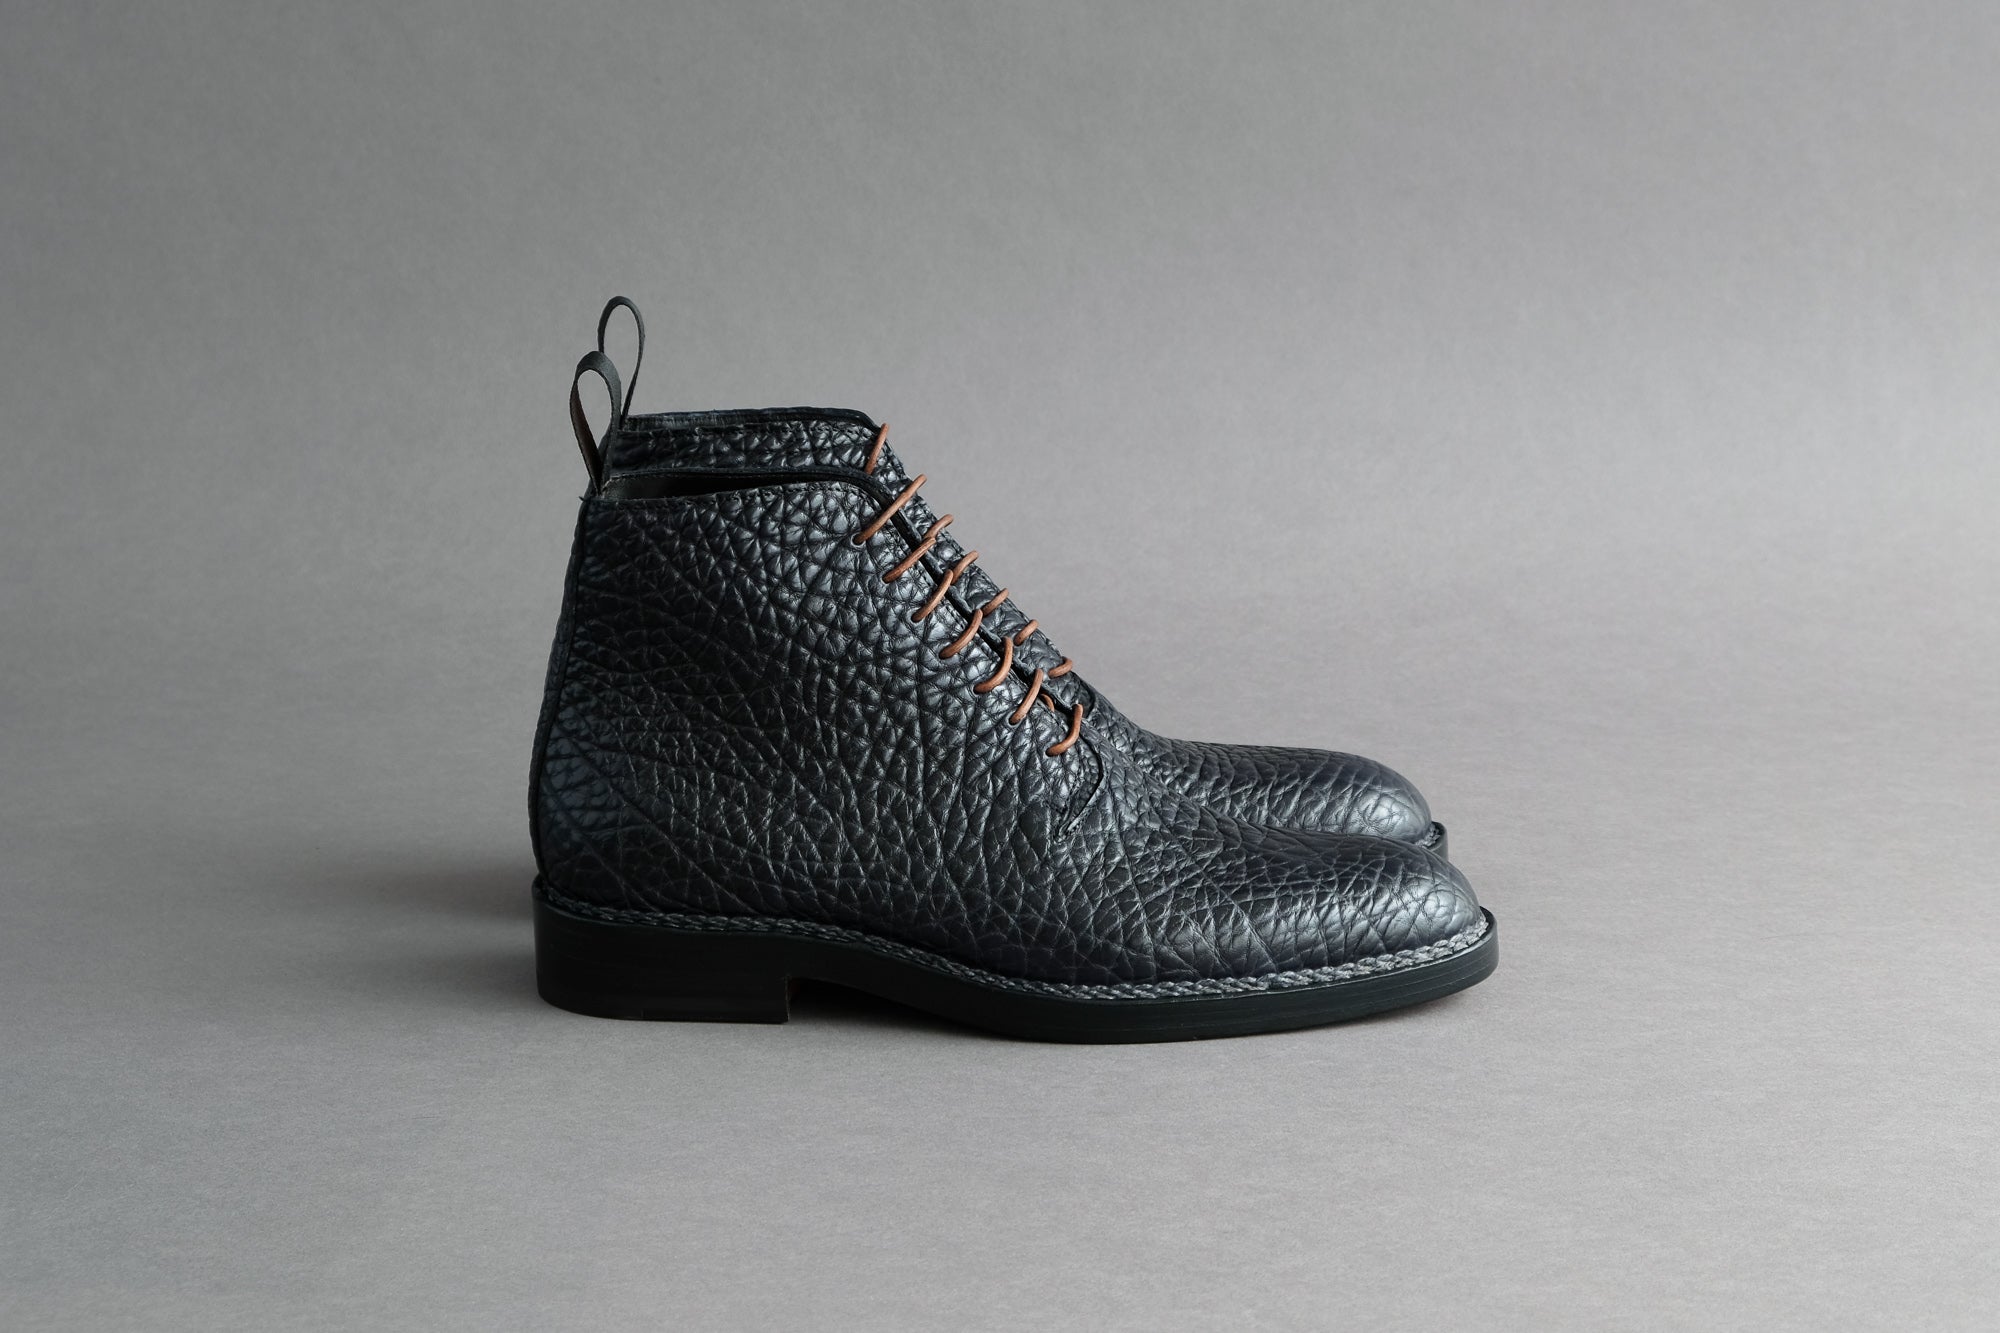 Zonkey Boot Norvegese wholecut derby boots from black Shrunken Bull leather